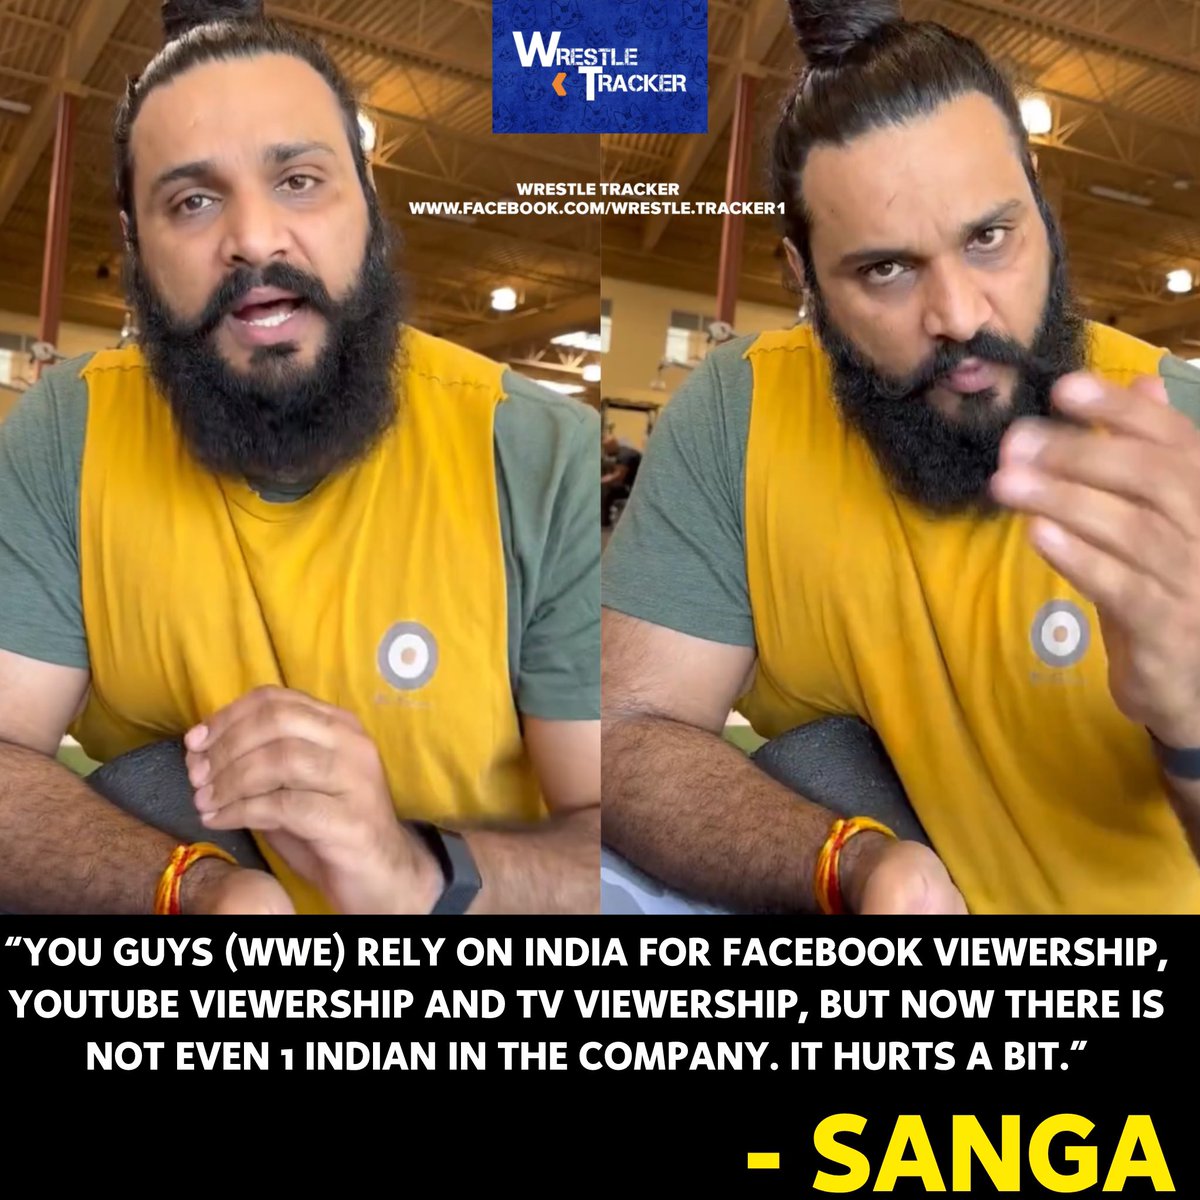 Sanga reacts as WWE releases all Indian wrestlers 💔🇮🇳

#WWE #WWEReleases